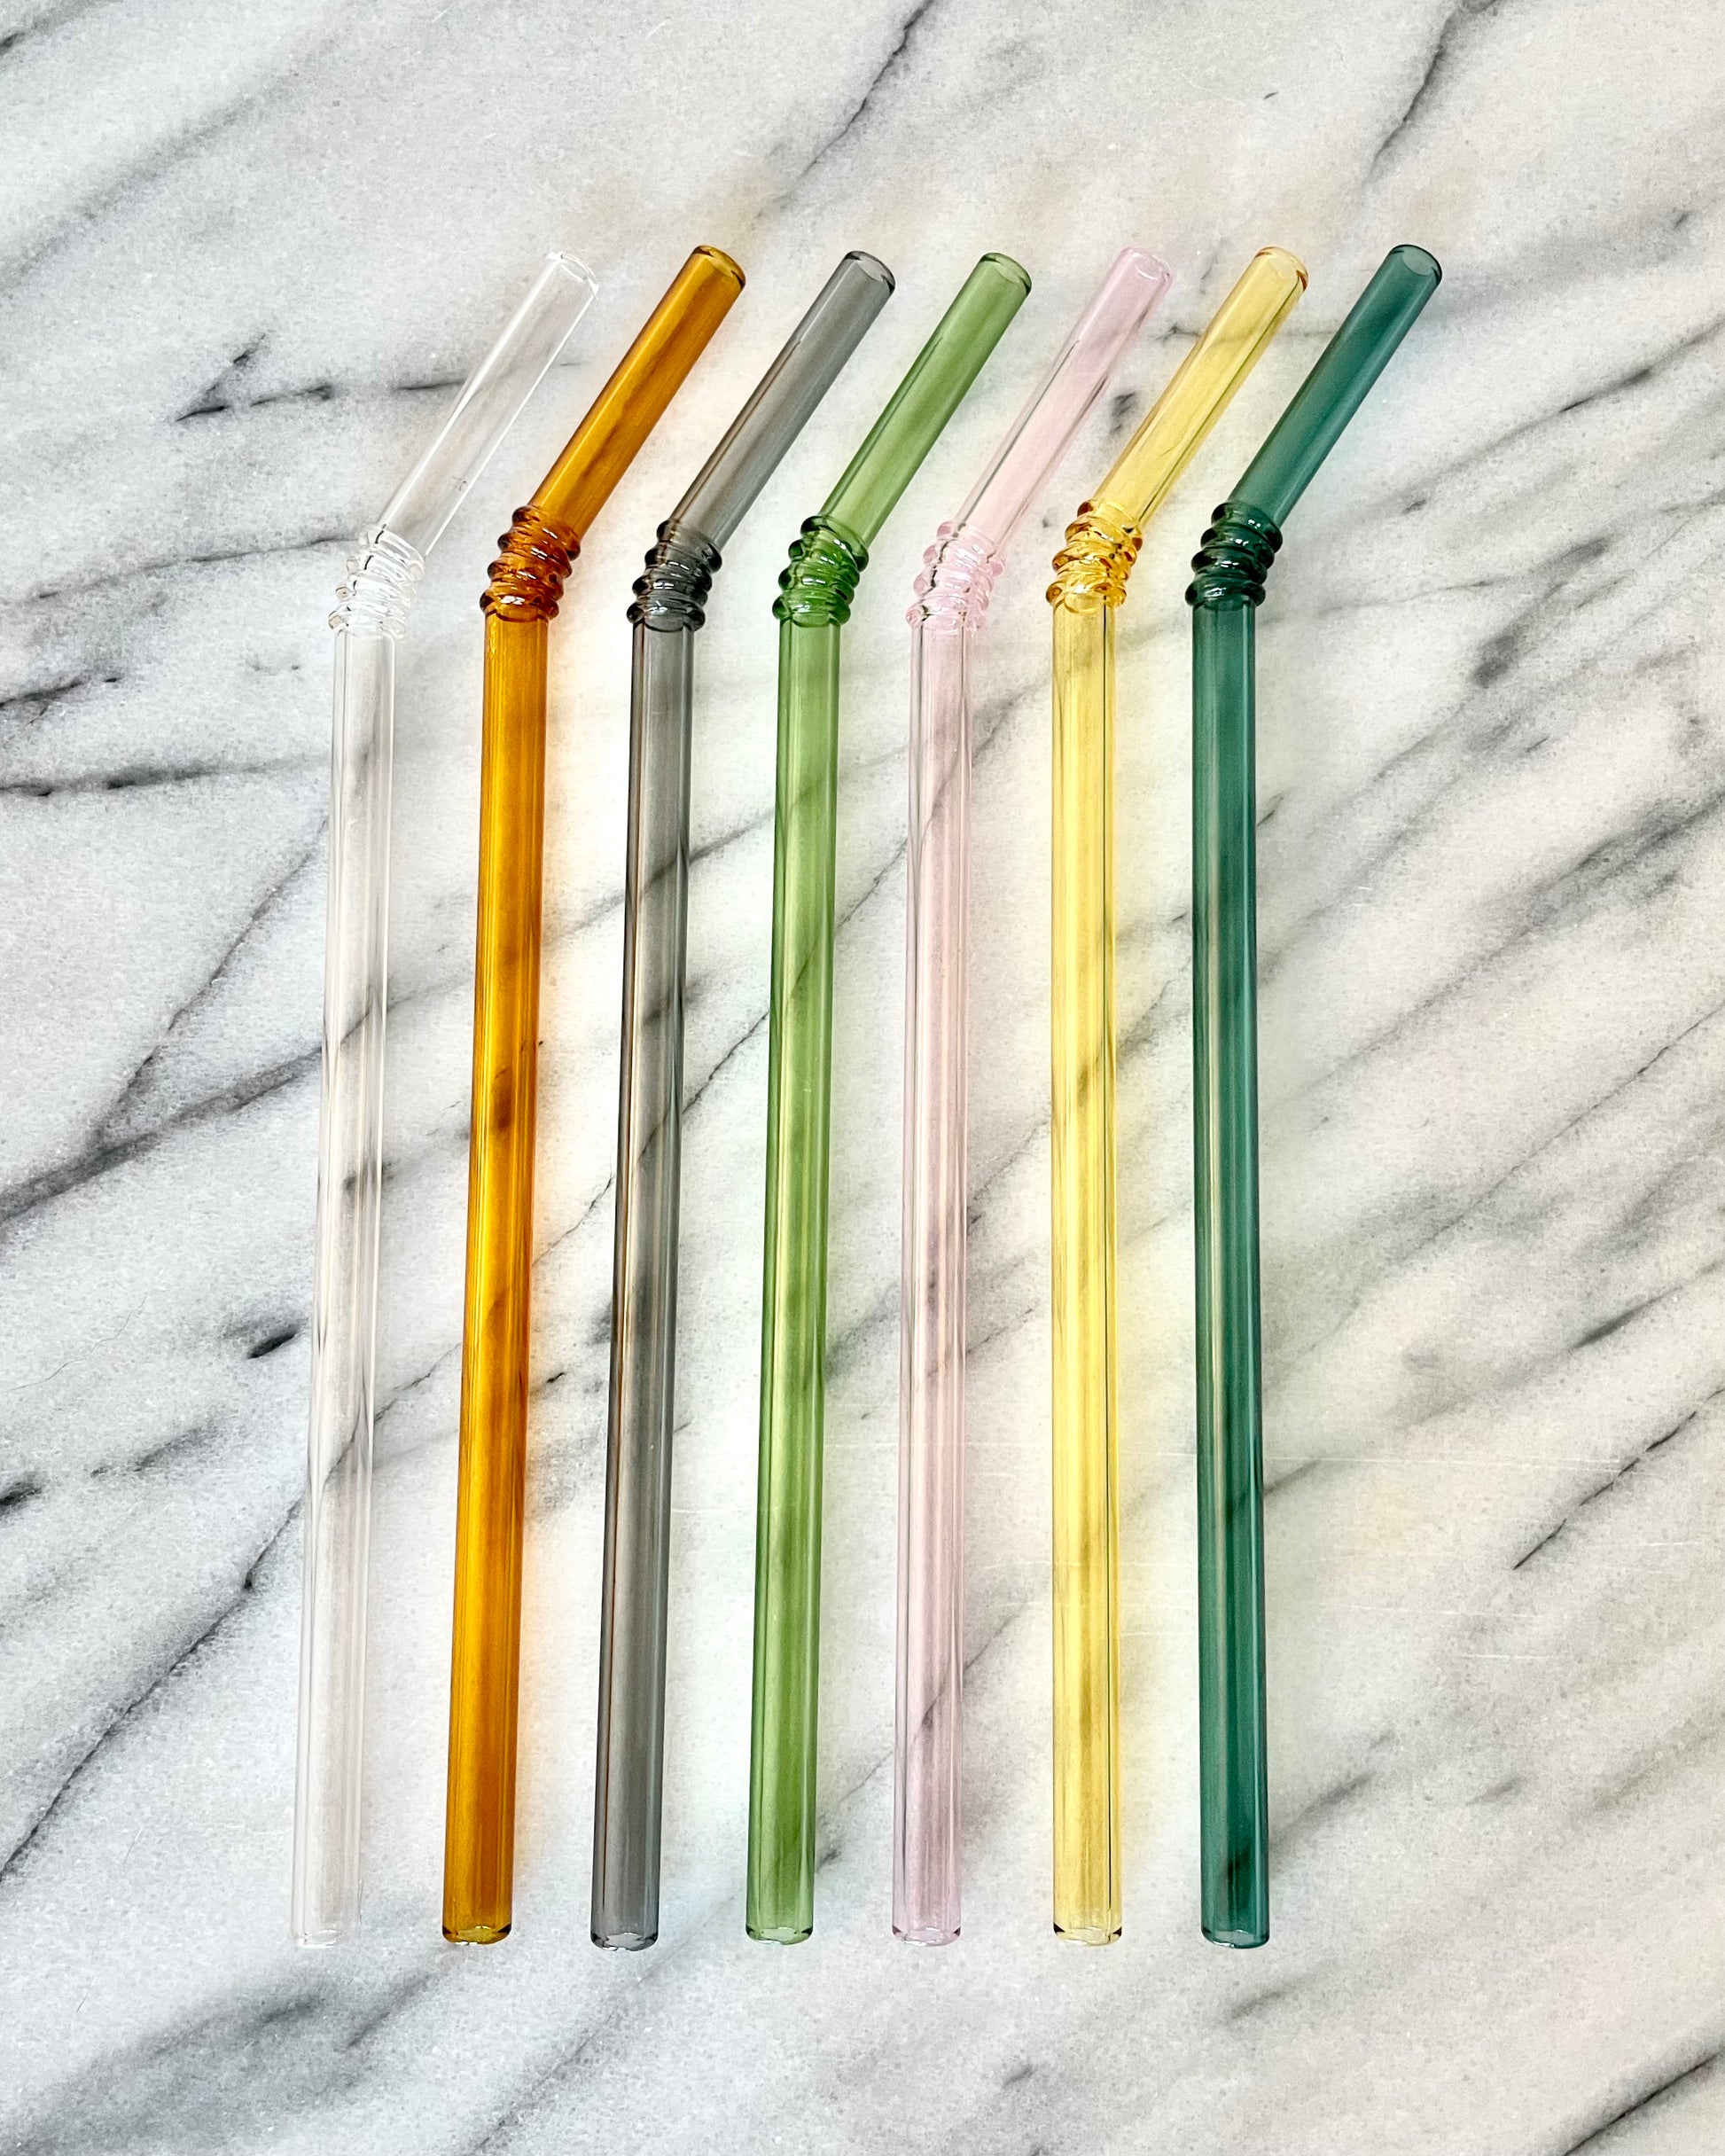 Dior Releases Reusable Glass Straws in a Nod to Sustainability